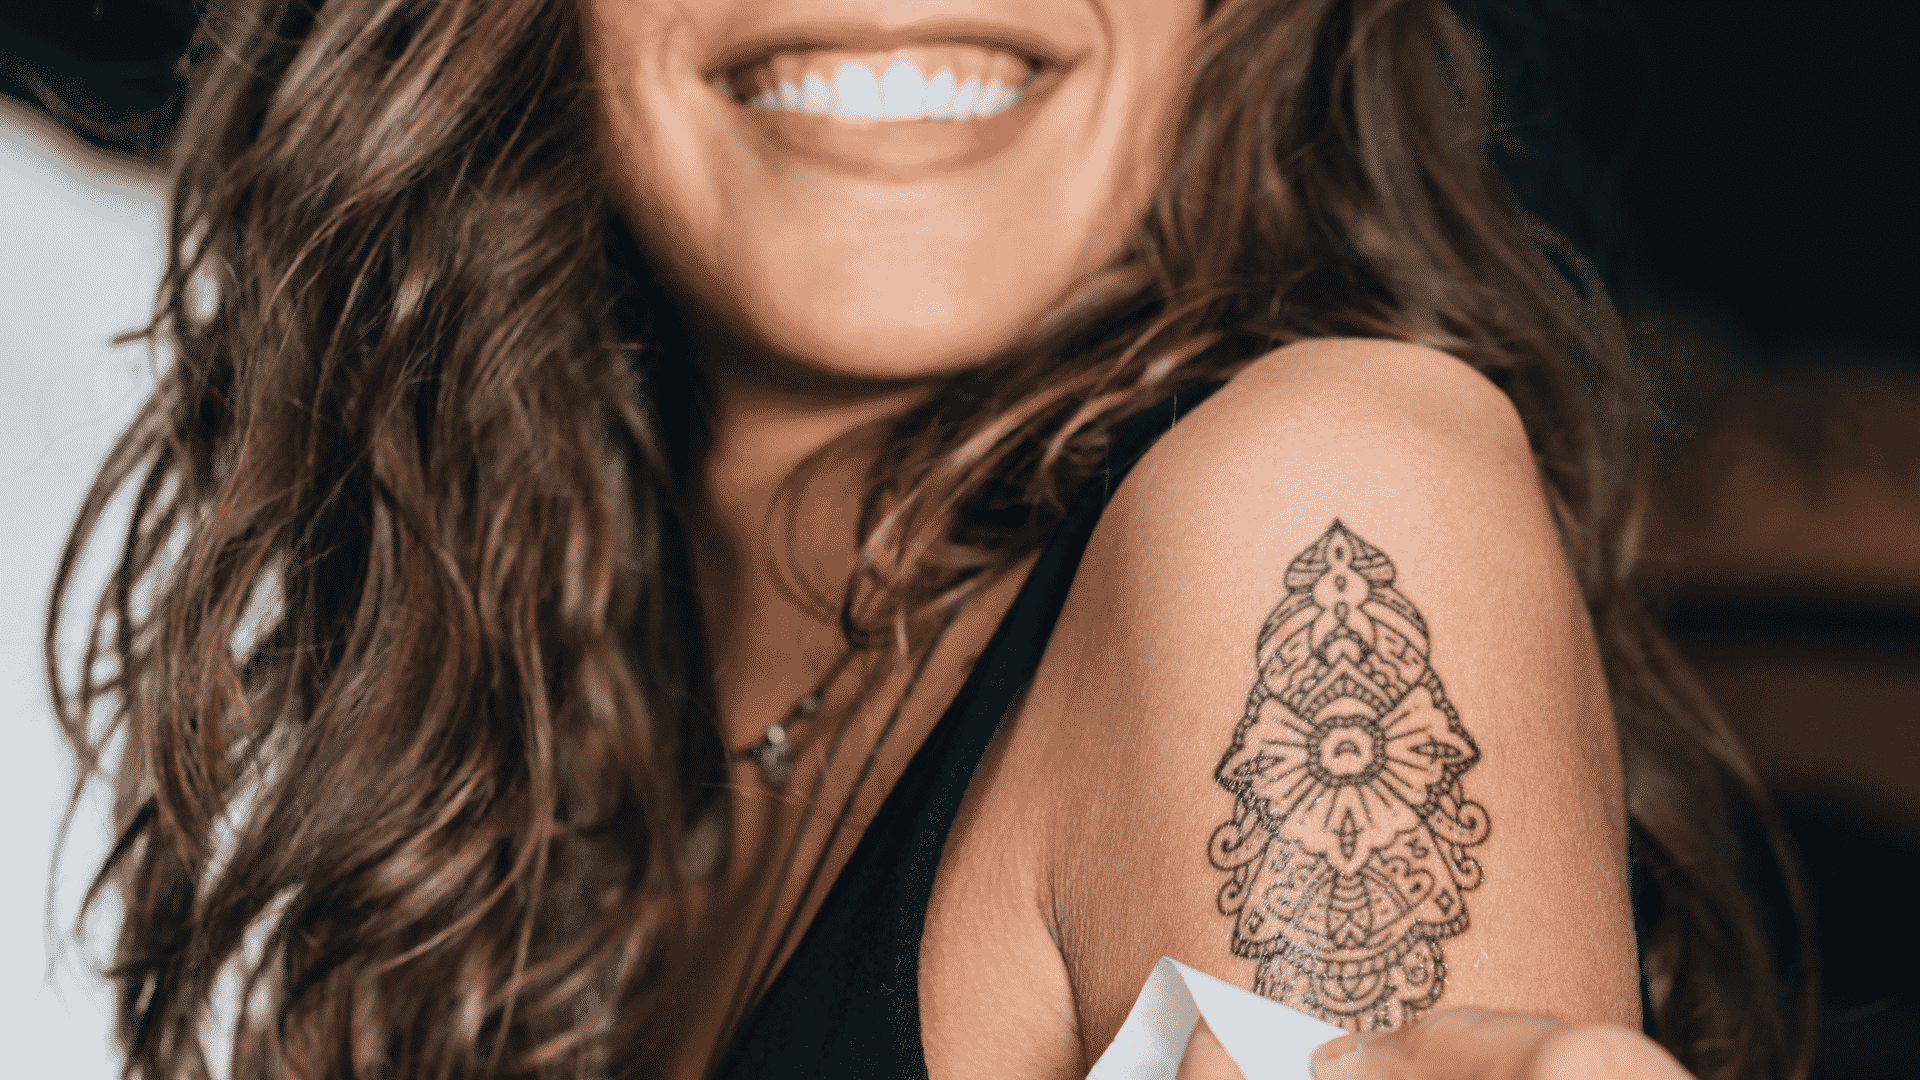 How Inkbox steers customers through its huge online catalog of temporary tattoos